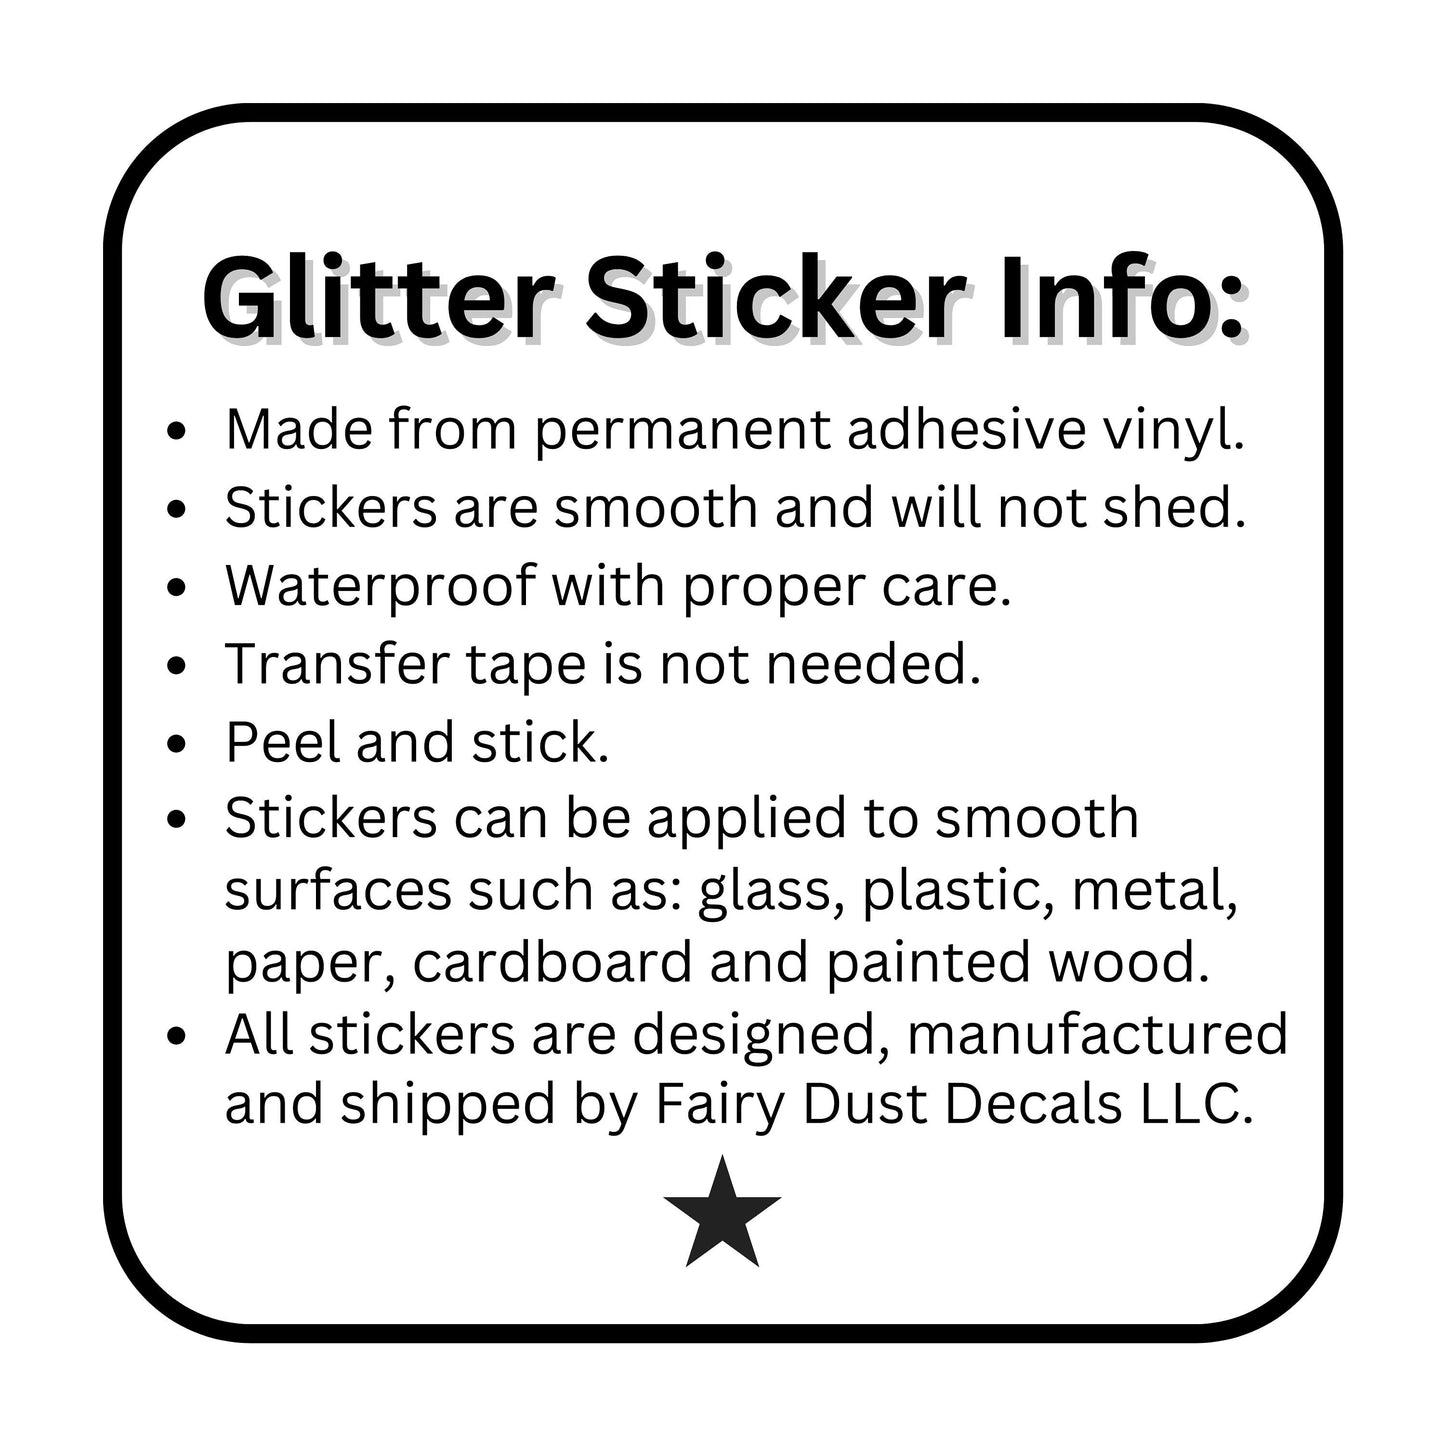 Beer Stickers, set of 42 mugs of beer, cold drink stickers for football parties, college tailgates, planners, journals and scrapbook pages.